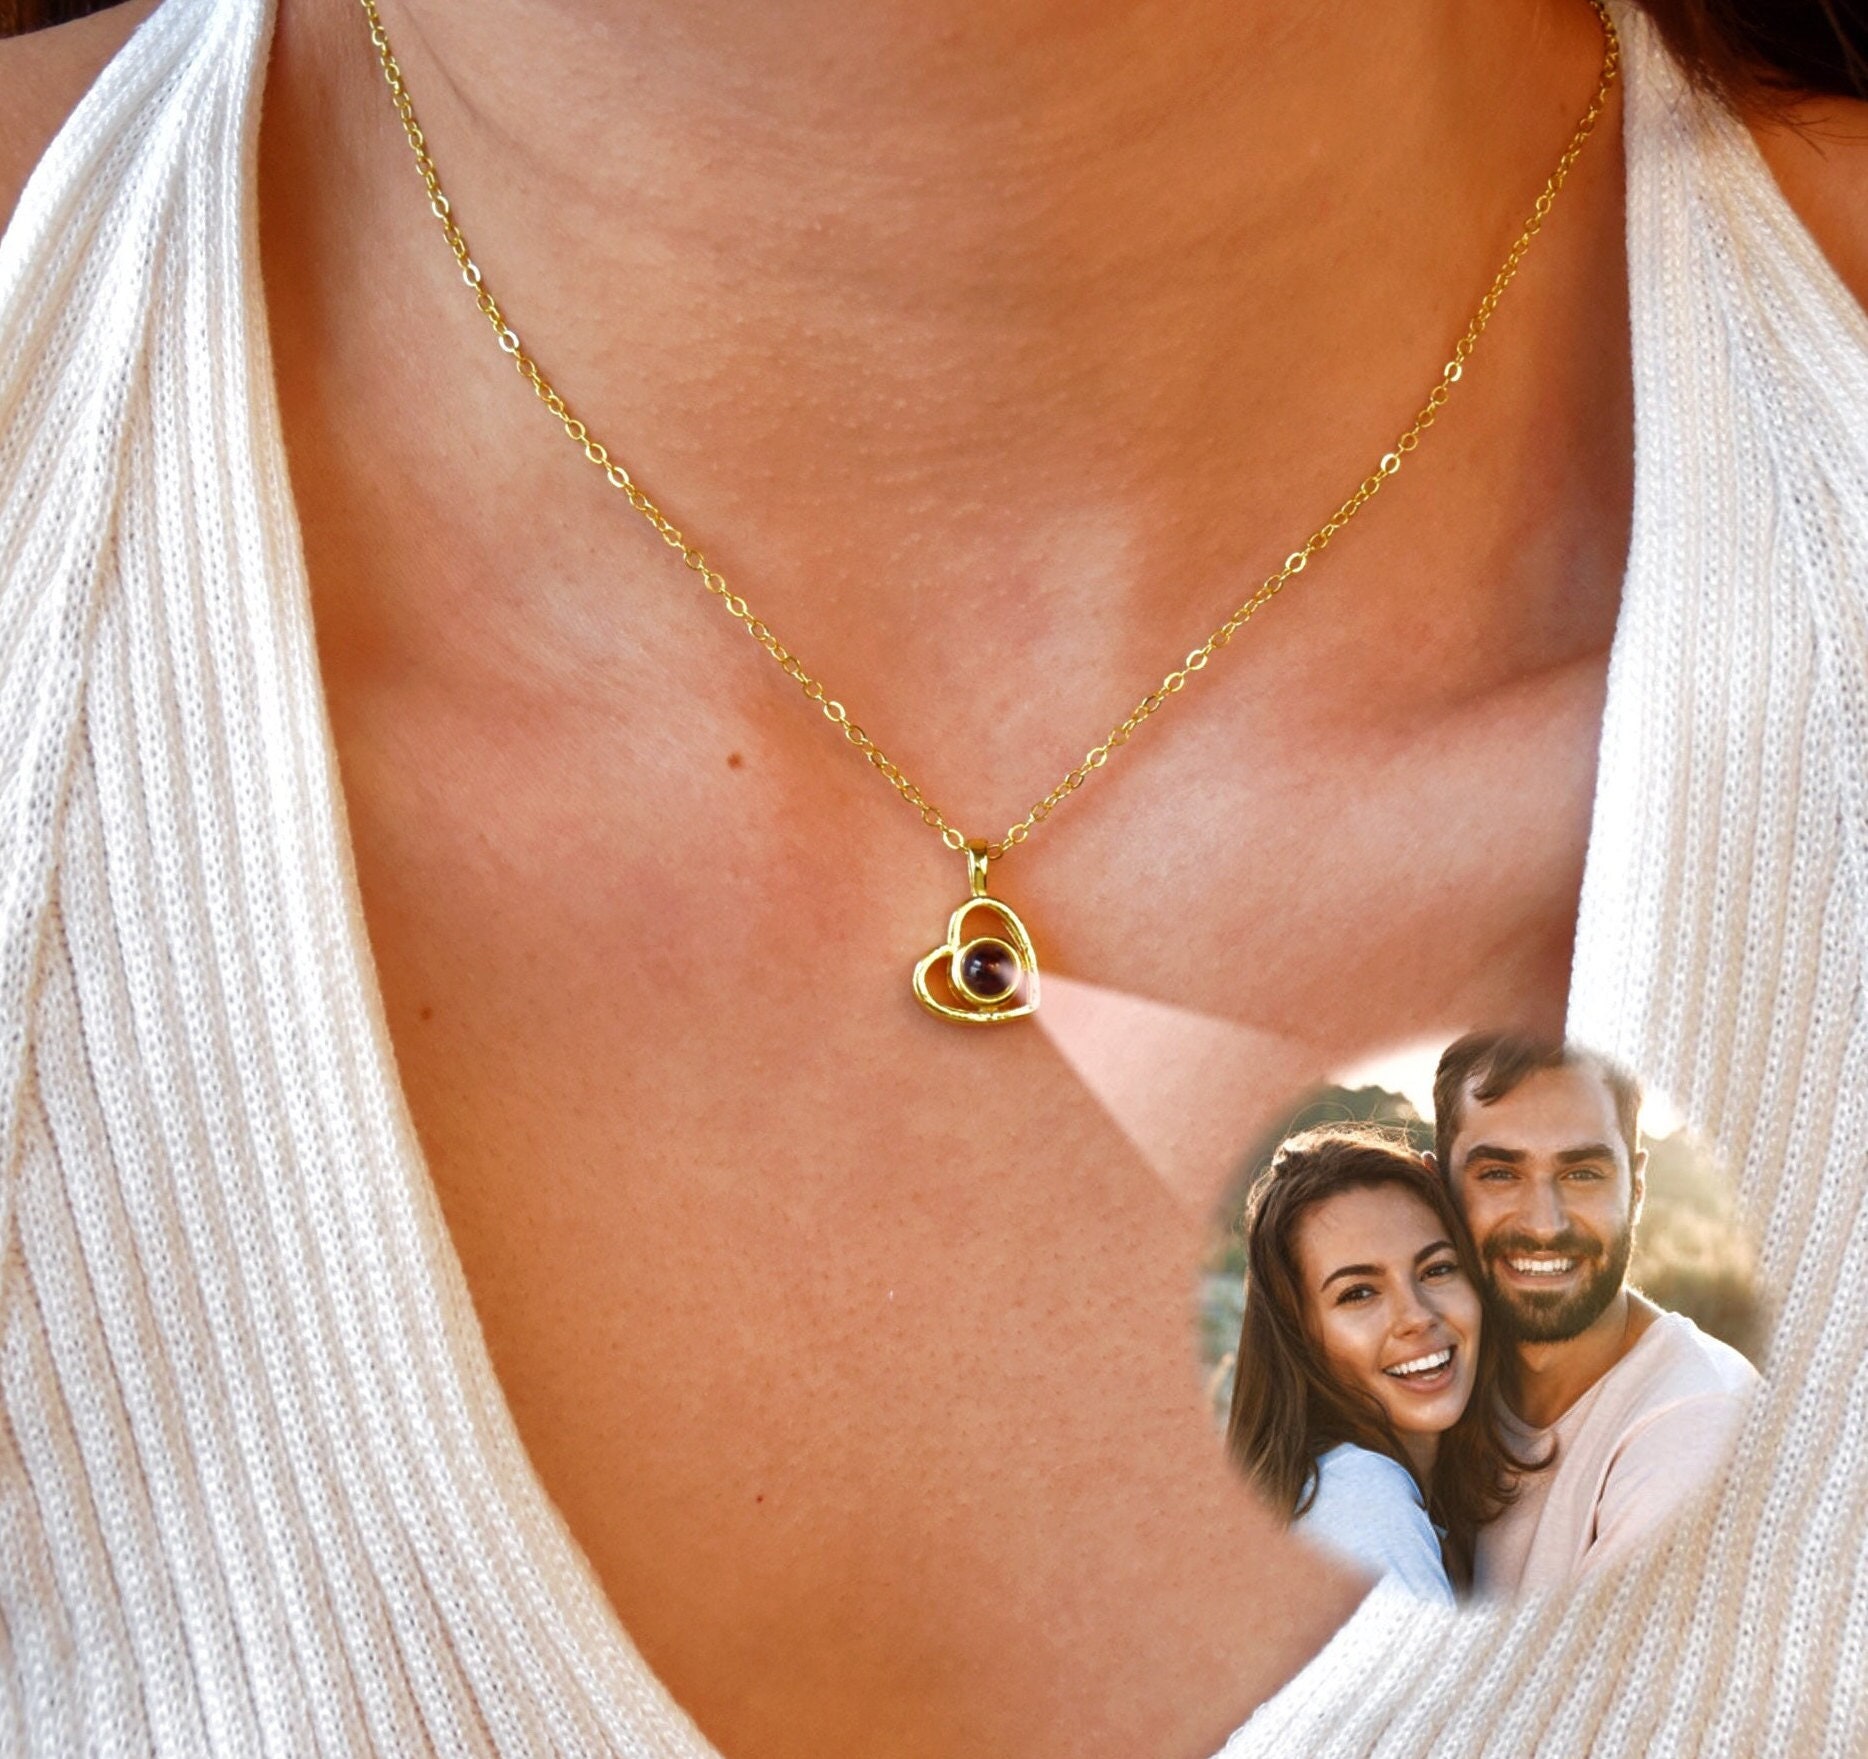 Godchoices Personalized Couple Necklace Set with Photo Love Heart Matching  Photo Necklace Sterling Silver Couples Photo Projection Necklace for